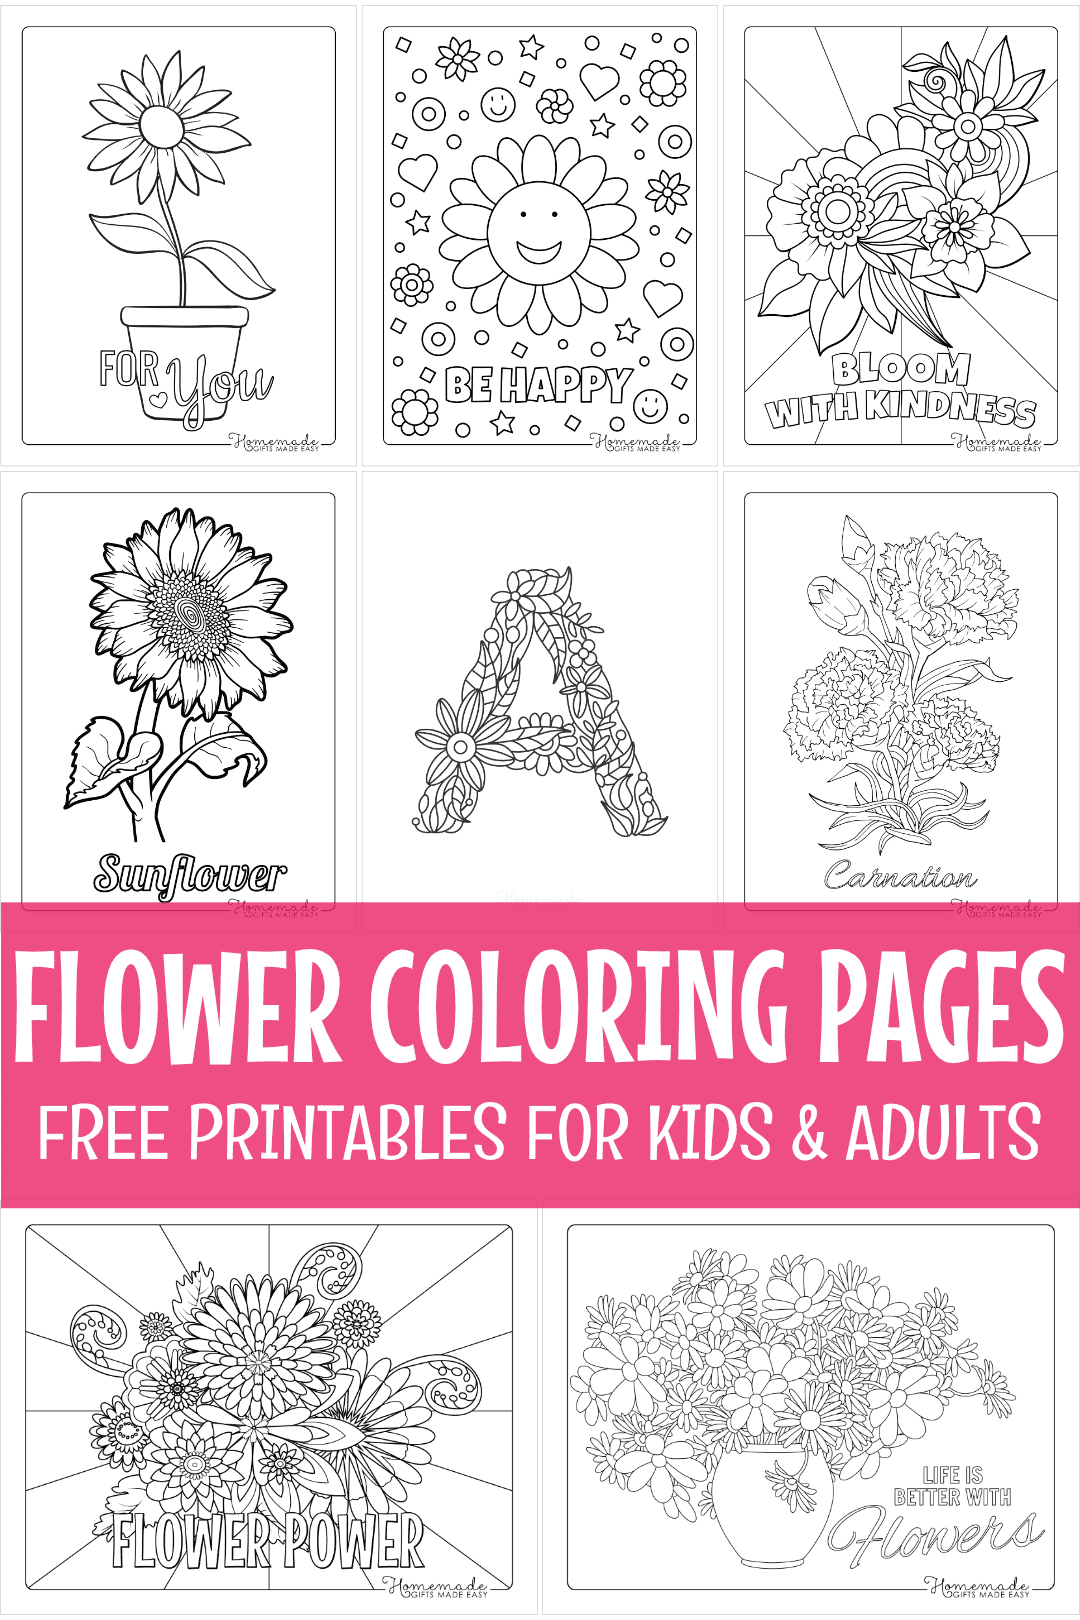 5300 Collections Online Coloring Pages For 10 Year Olds  HD